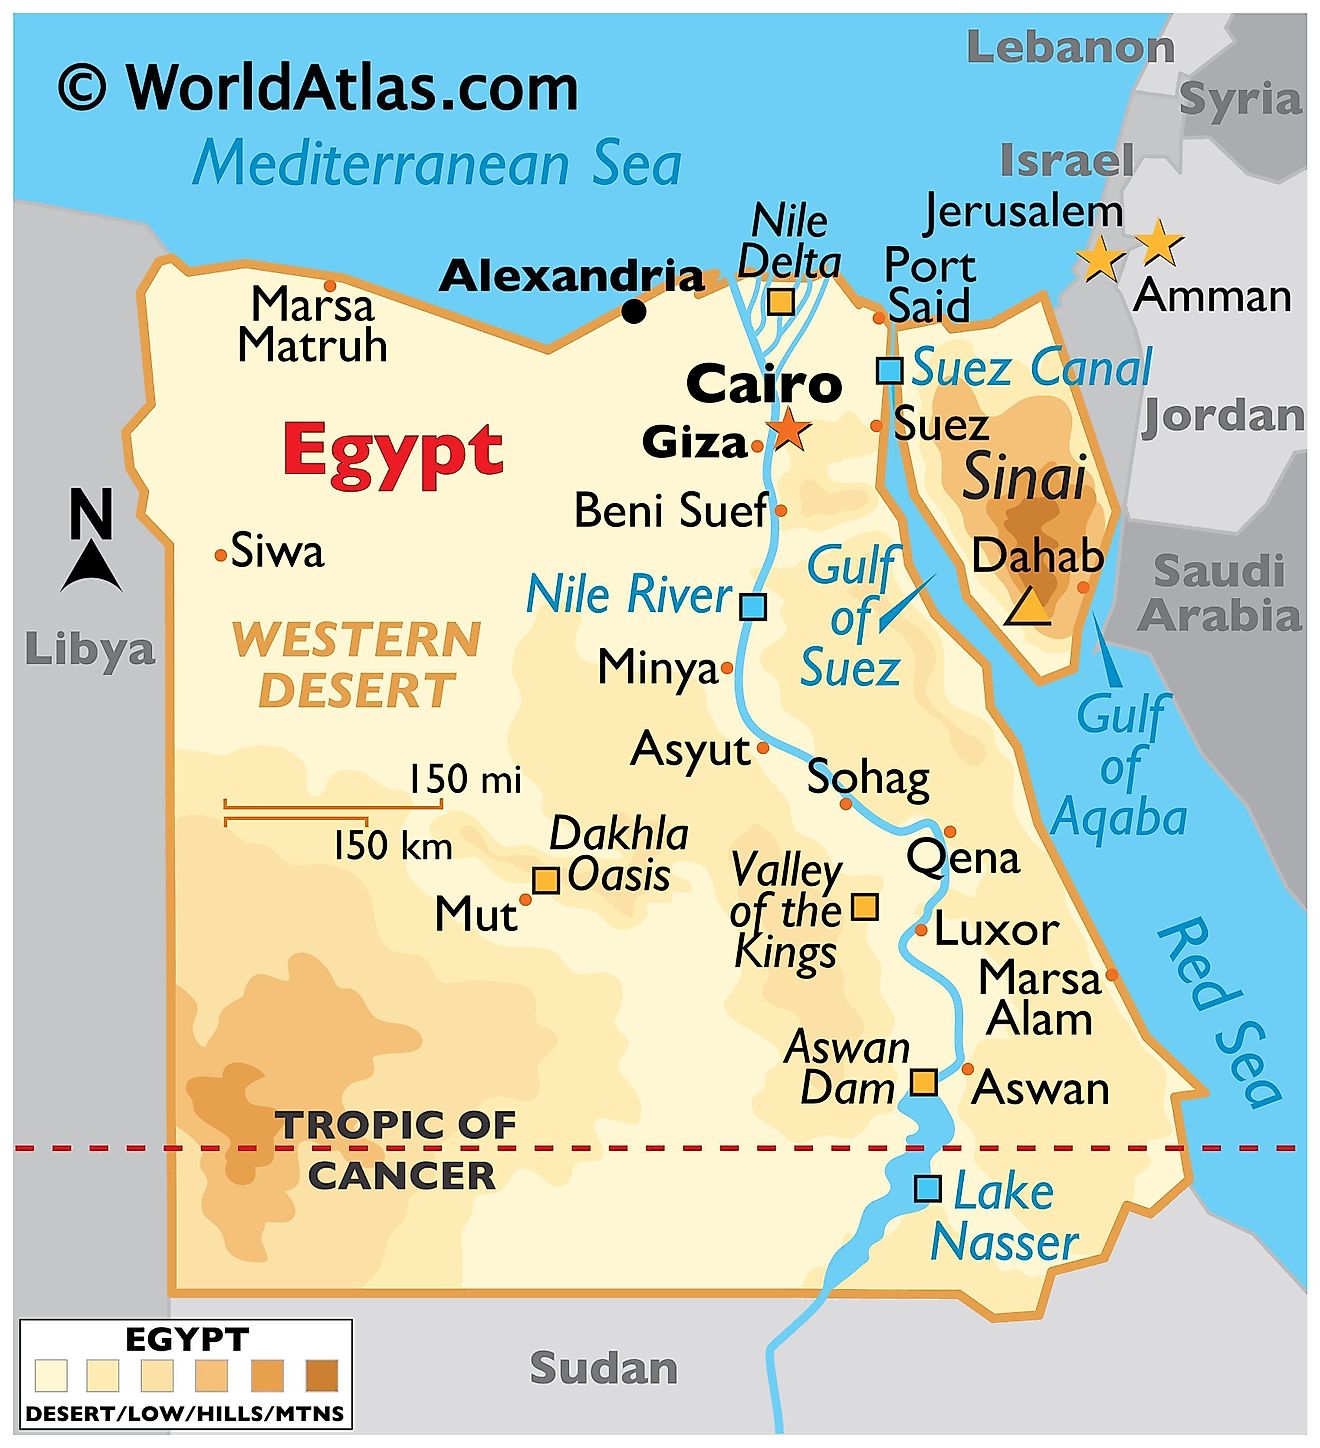 Physical Map of Egypt showing the state boundaries, relief, the Nile River, major lakes, deserts, and important cities.